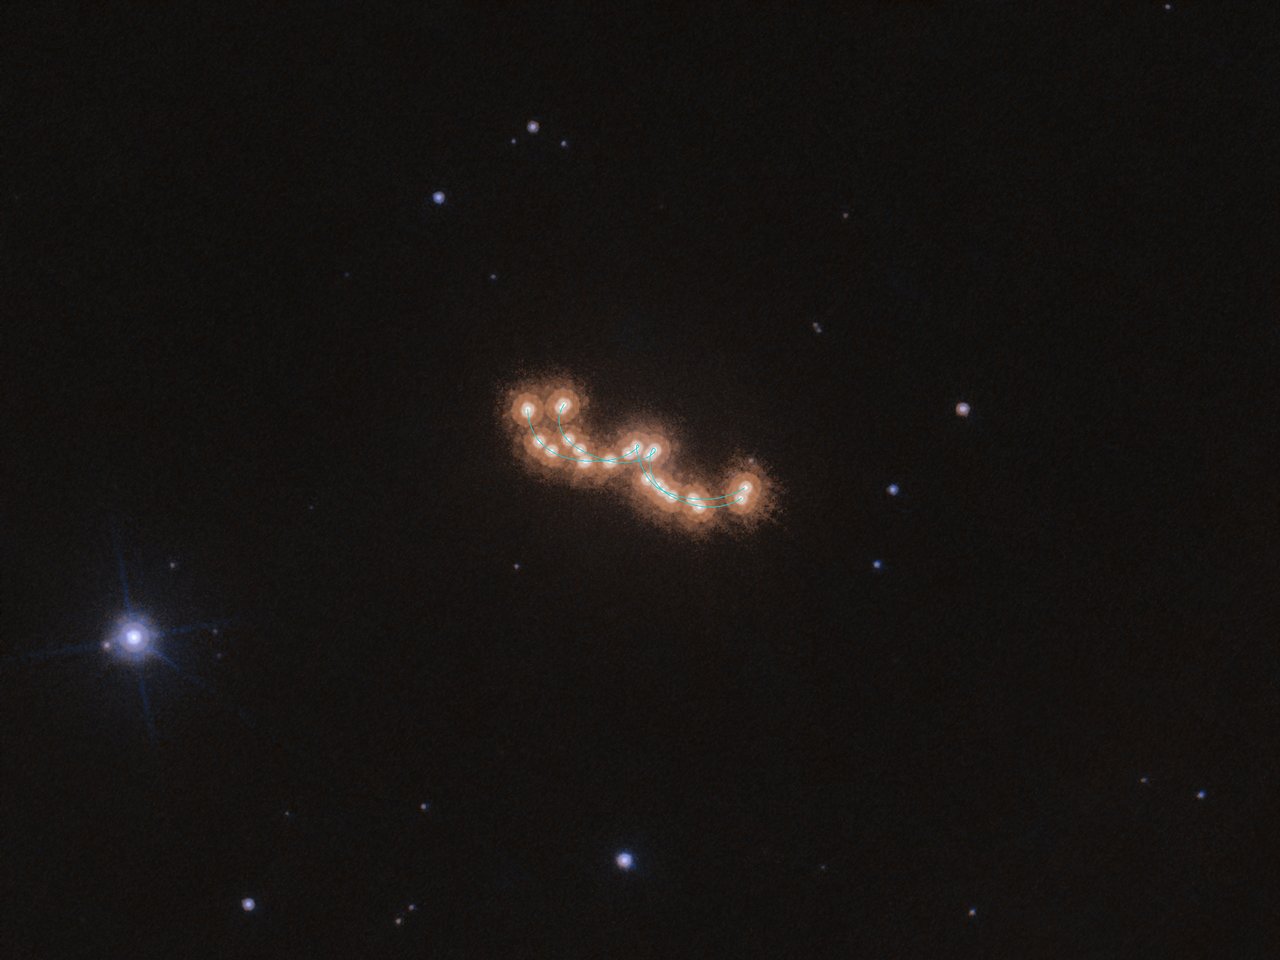 This seemingly unspectacular series of dots with varying distances between them actually shows the slow waltz of two brown dwarfs. The image is a stack of 12 images made over the course of three years with the NASA/ESA Hubble Space Telescope. Using high-precision astrometry, an Italian-led team of astronomers tracked the two components of the system as they moved both across the sky and around each other. The observed system, Luhman 16AB, is only about six light-years away and is the third closest stellar system to Earth — after the triple star system Alpha Centauri and Barnard’s Star. Despite its proximity, Luhman 16AB was only discovered in 2013 by the astronomer Kevin Luhman. The two brown dwarfs that make up the system, Luhman 16A and Luhman 16B, orbit each other at a distance of only three times the distance between the Earth and the Sun, and so these observations are a showcase for Hubble’s precision and high resolution. The astronomers using Hubble to study Luhman 16AB were not only interested in the waltz of the two brown dwarfs, but were also searching for a third, invisible, dancing partner. Earlier observations with ESO’s Very Large Telescope indicated the presence of an exoplanet in the system. The team wanted to verify this claim by analysing the movement of the brown dwarfs in great detail over a long period of time, but the Hubble data showed that the two dwarfs are indeed dancing alone, unperturbed by a massive planetary companion. Links:  INAF press release (Italian) Video on waltzing dwarfs